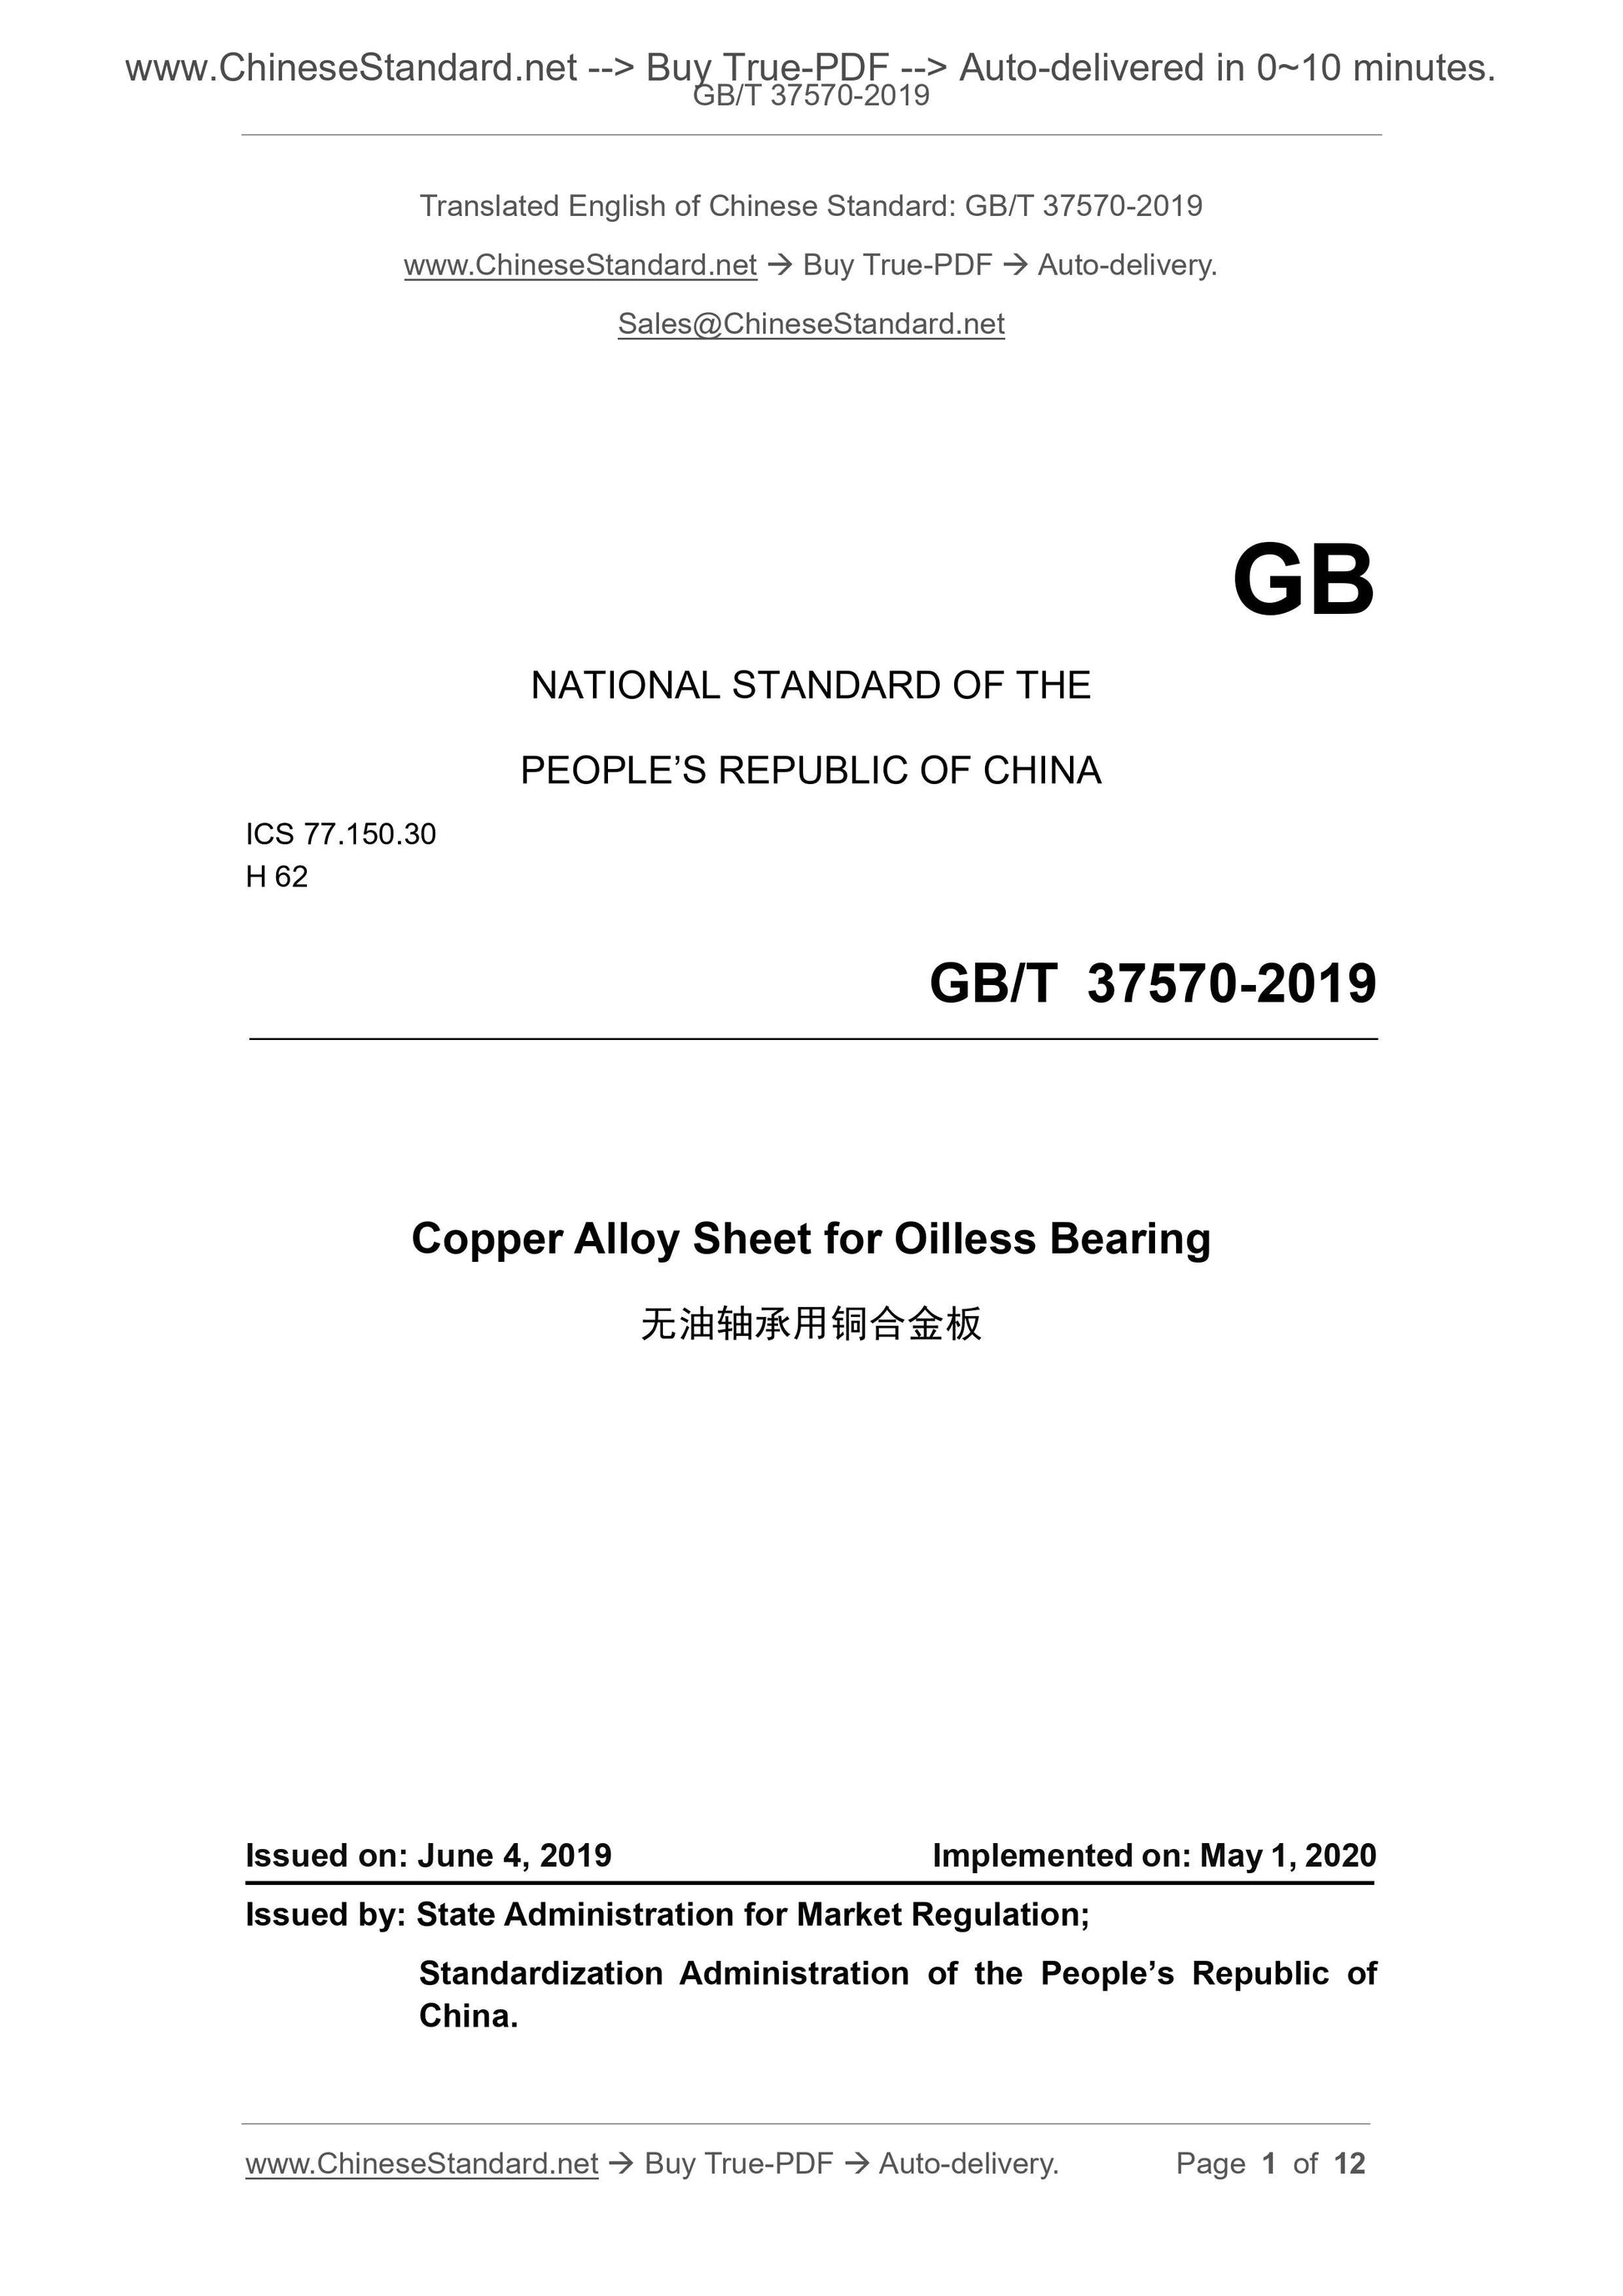 GB/T 37570-2019 Page 1